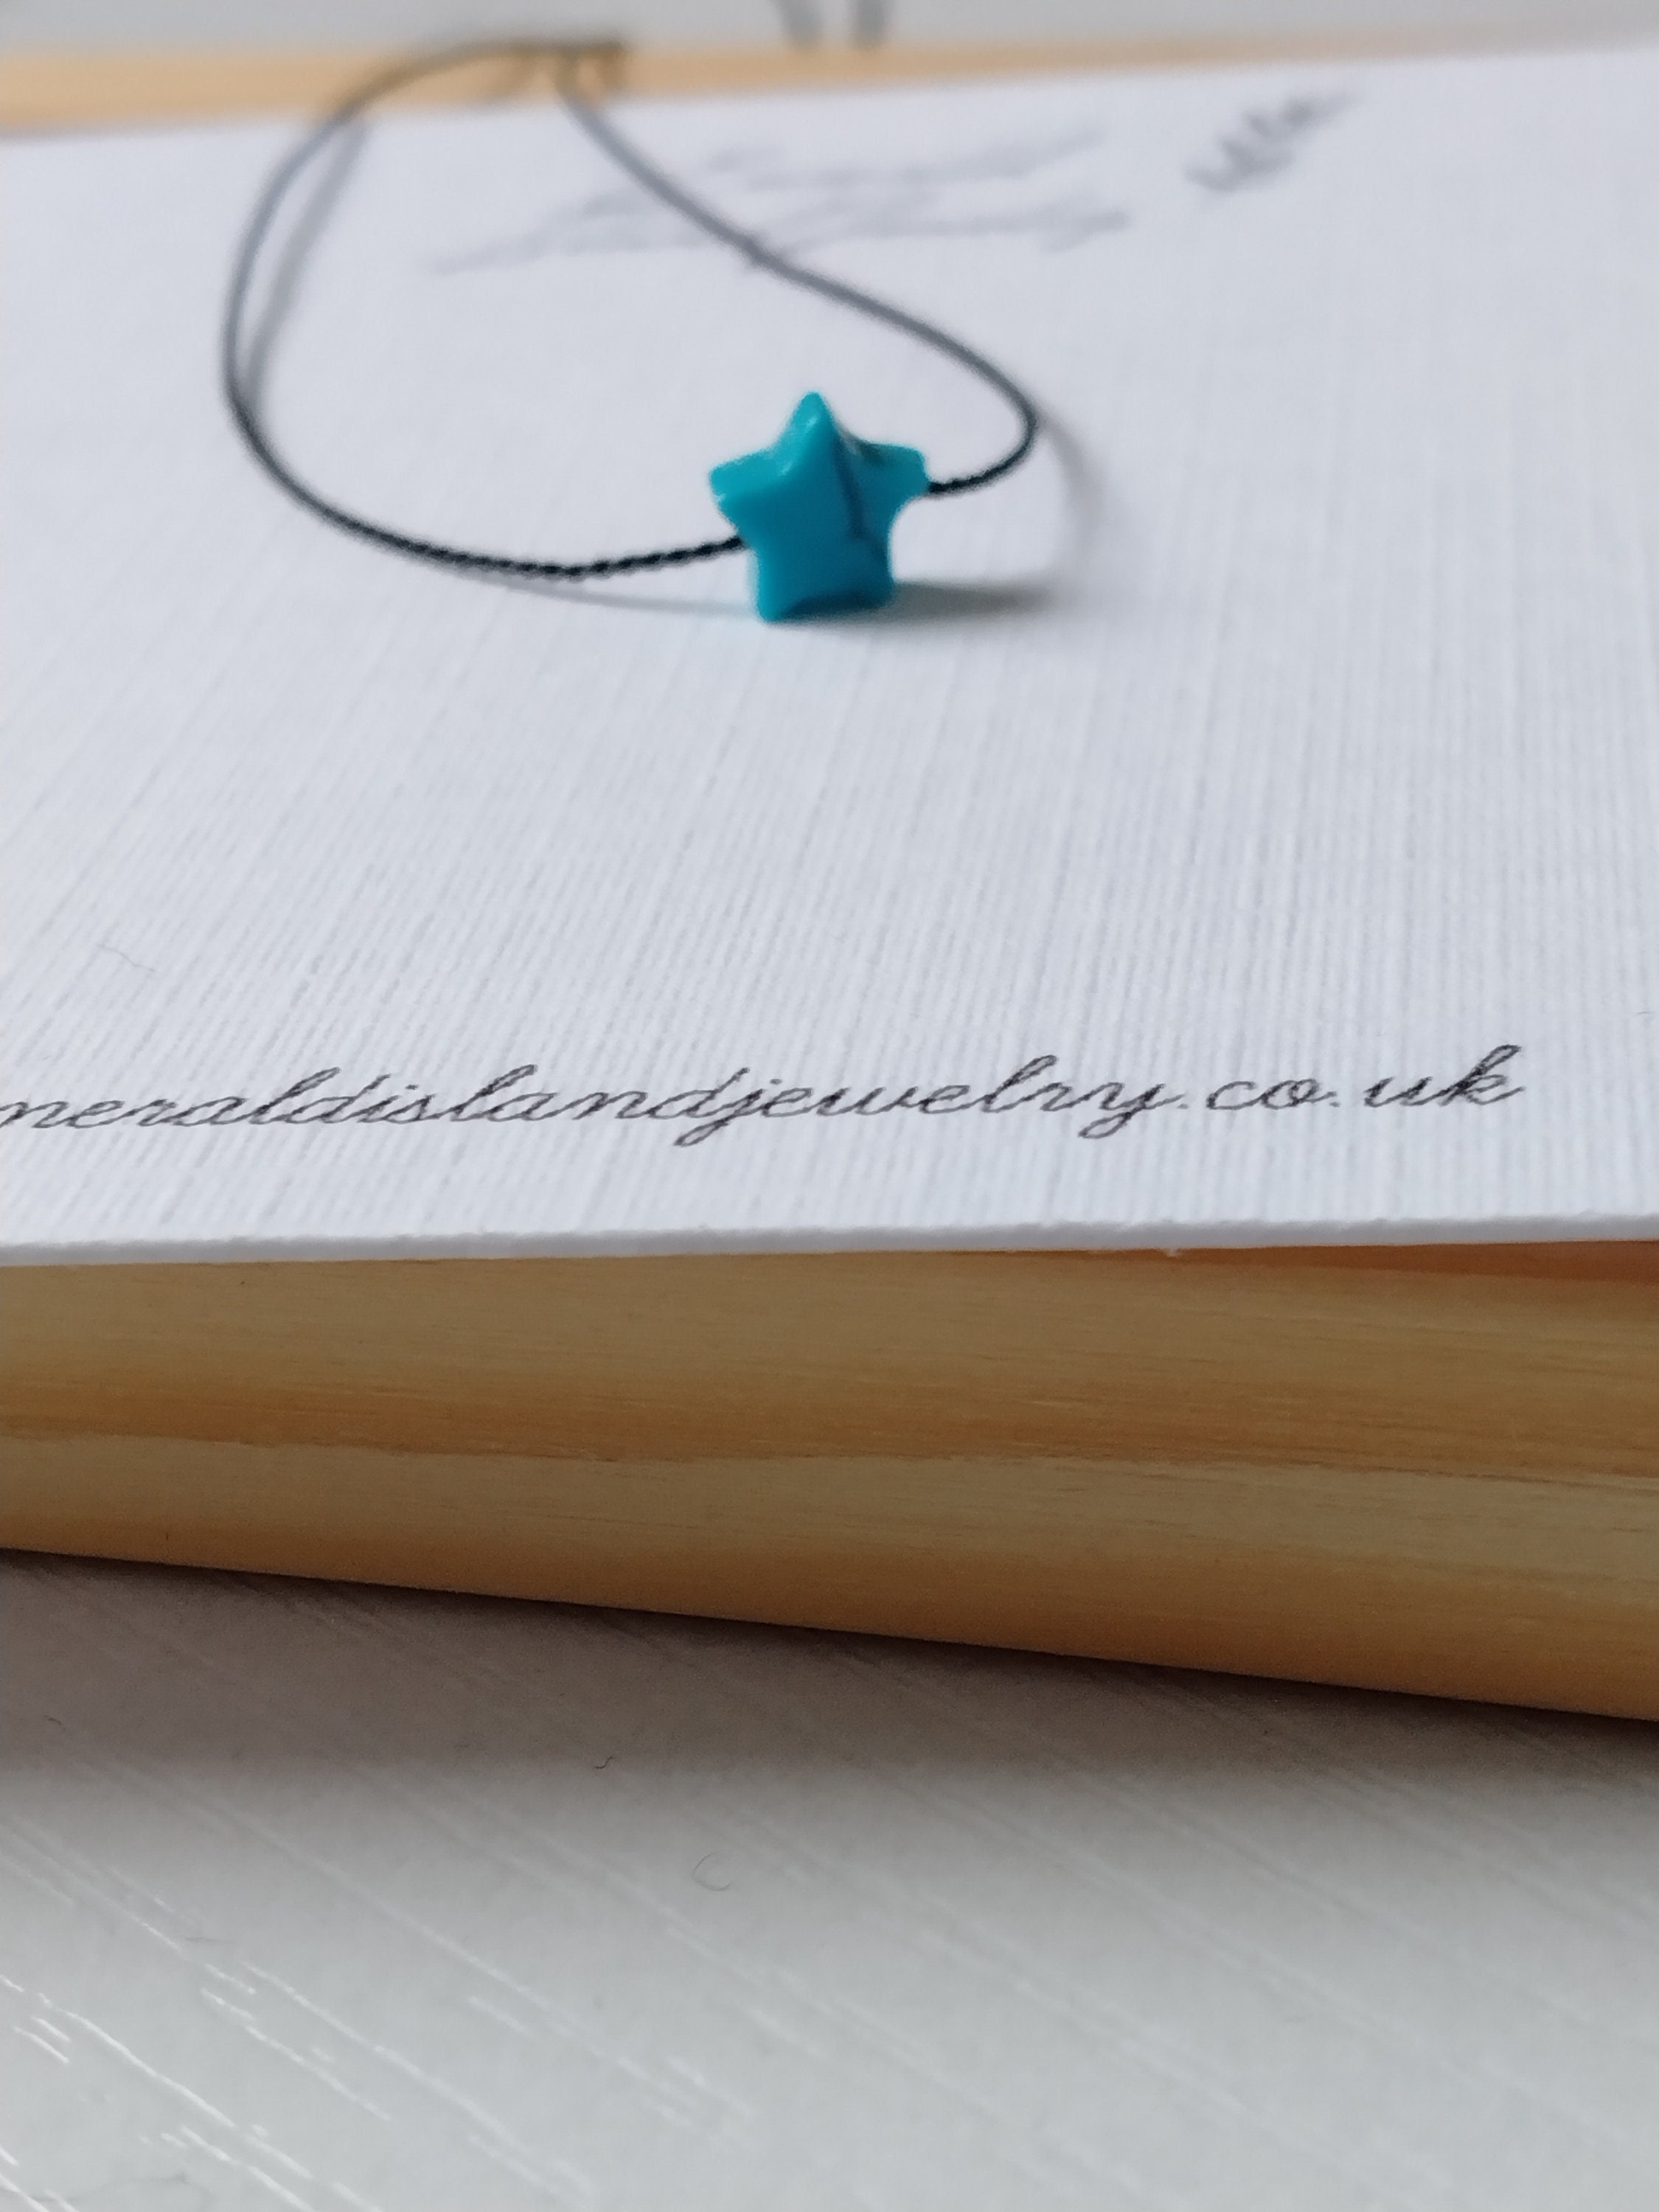 Blue Star Necklace Turquoise Howlite Star Howlite Star Pendant Mothers Day Gift Holistic Jewellery Black Cord Necklace